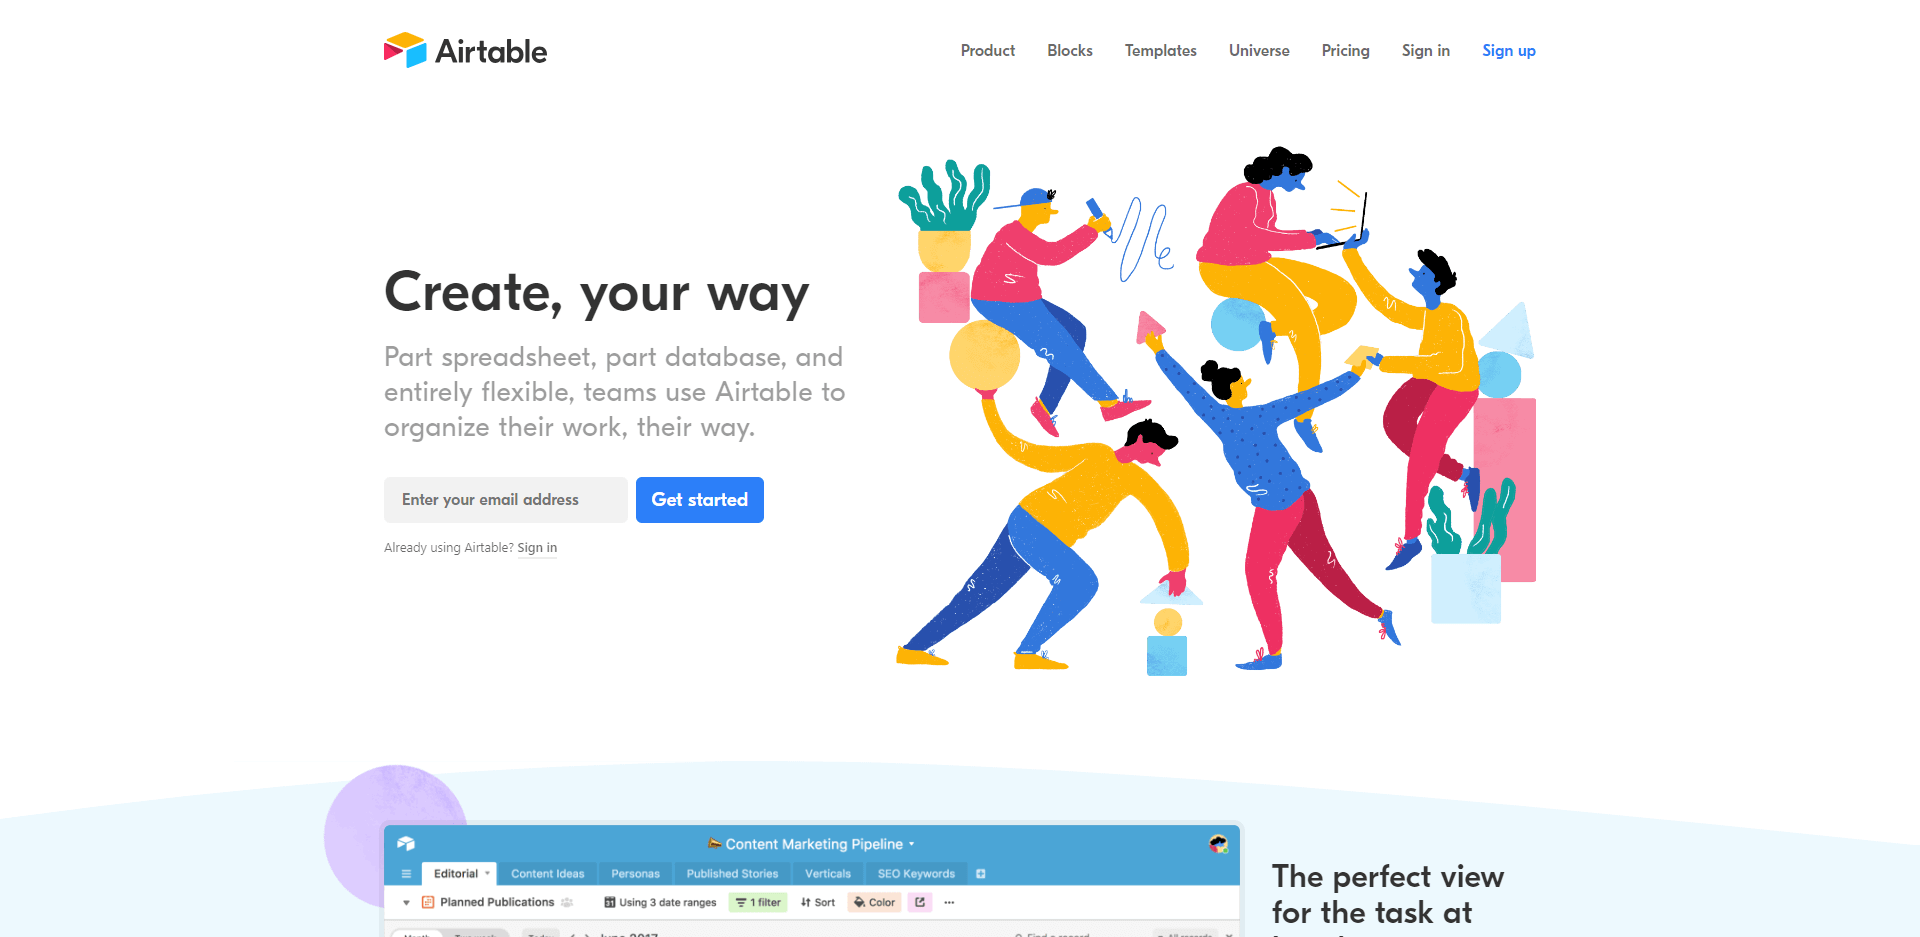 Airtable: Part Spreadsheet, part database, entirely flexible, teams use Airtable to organize their work, their way